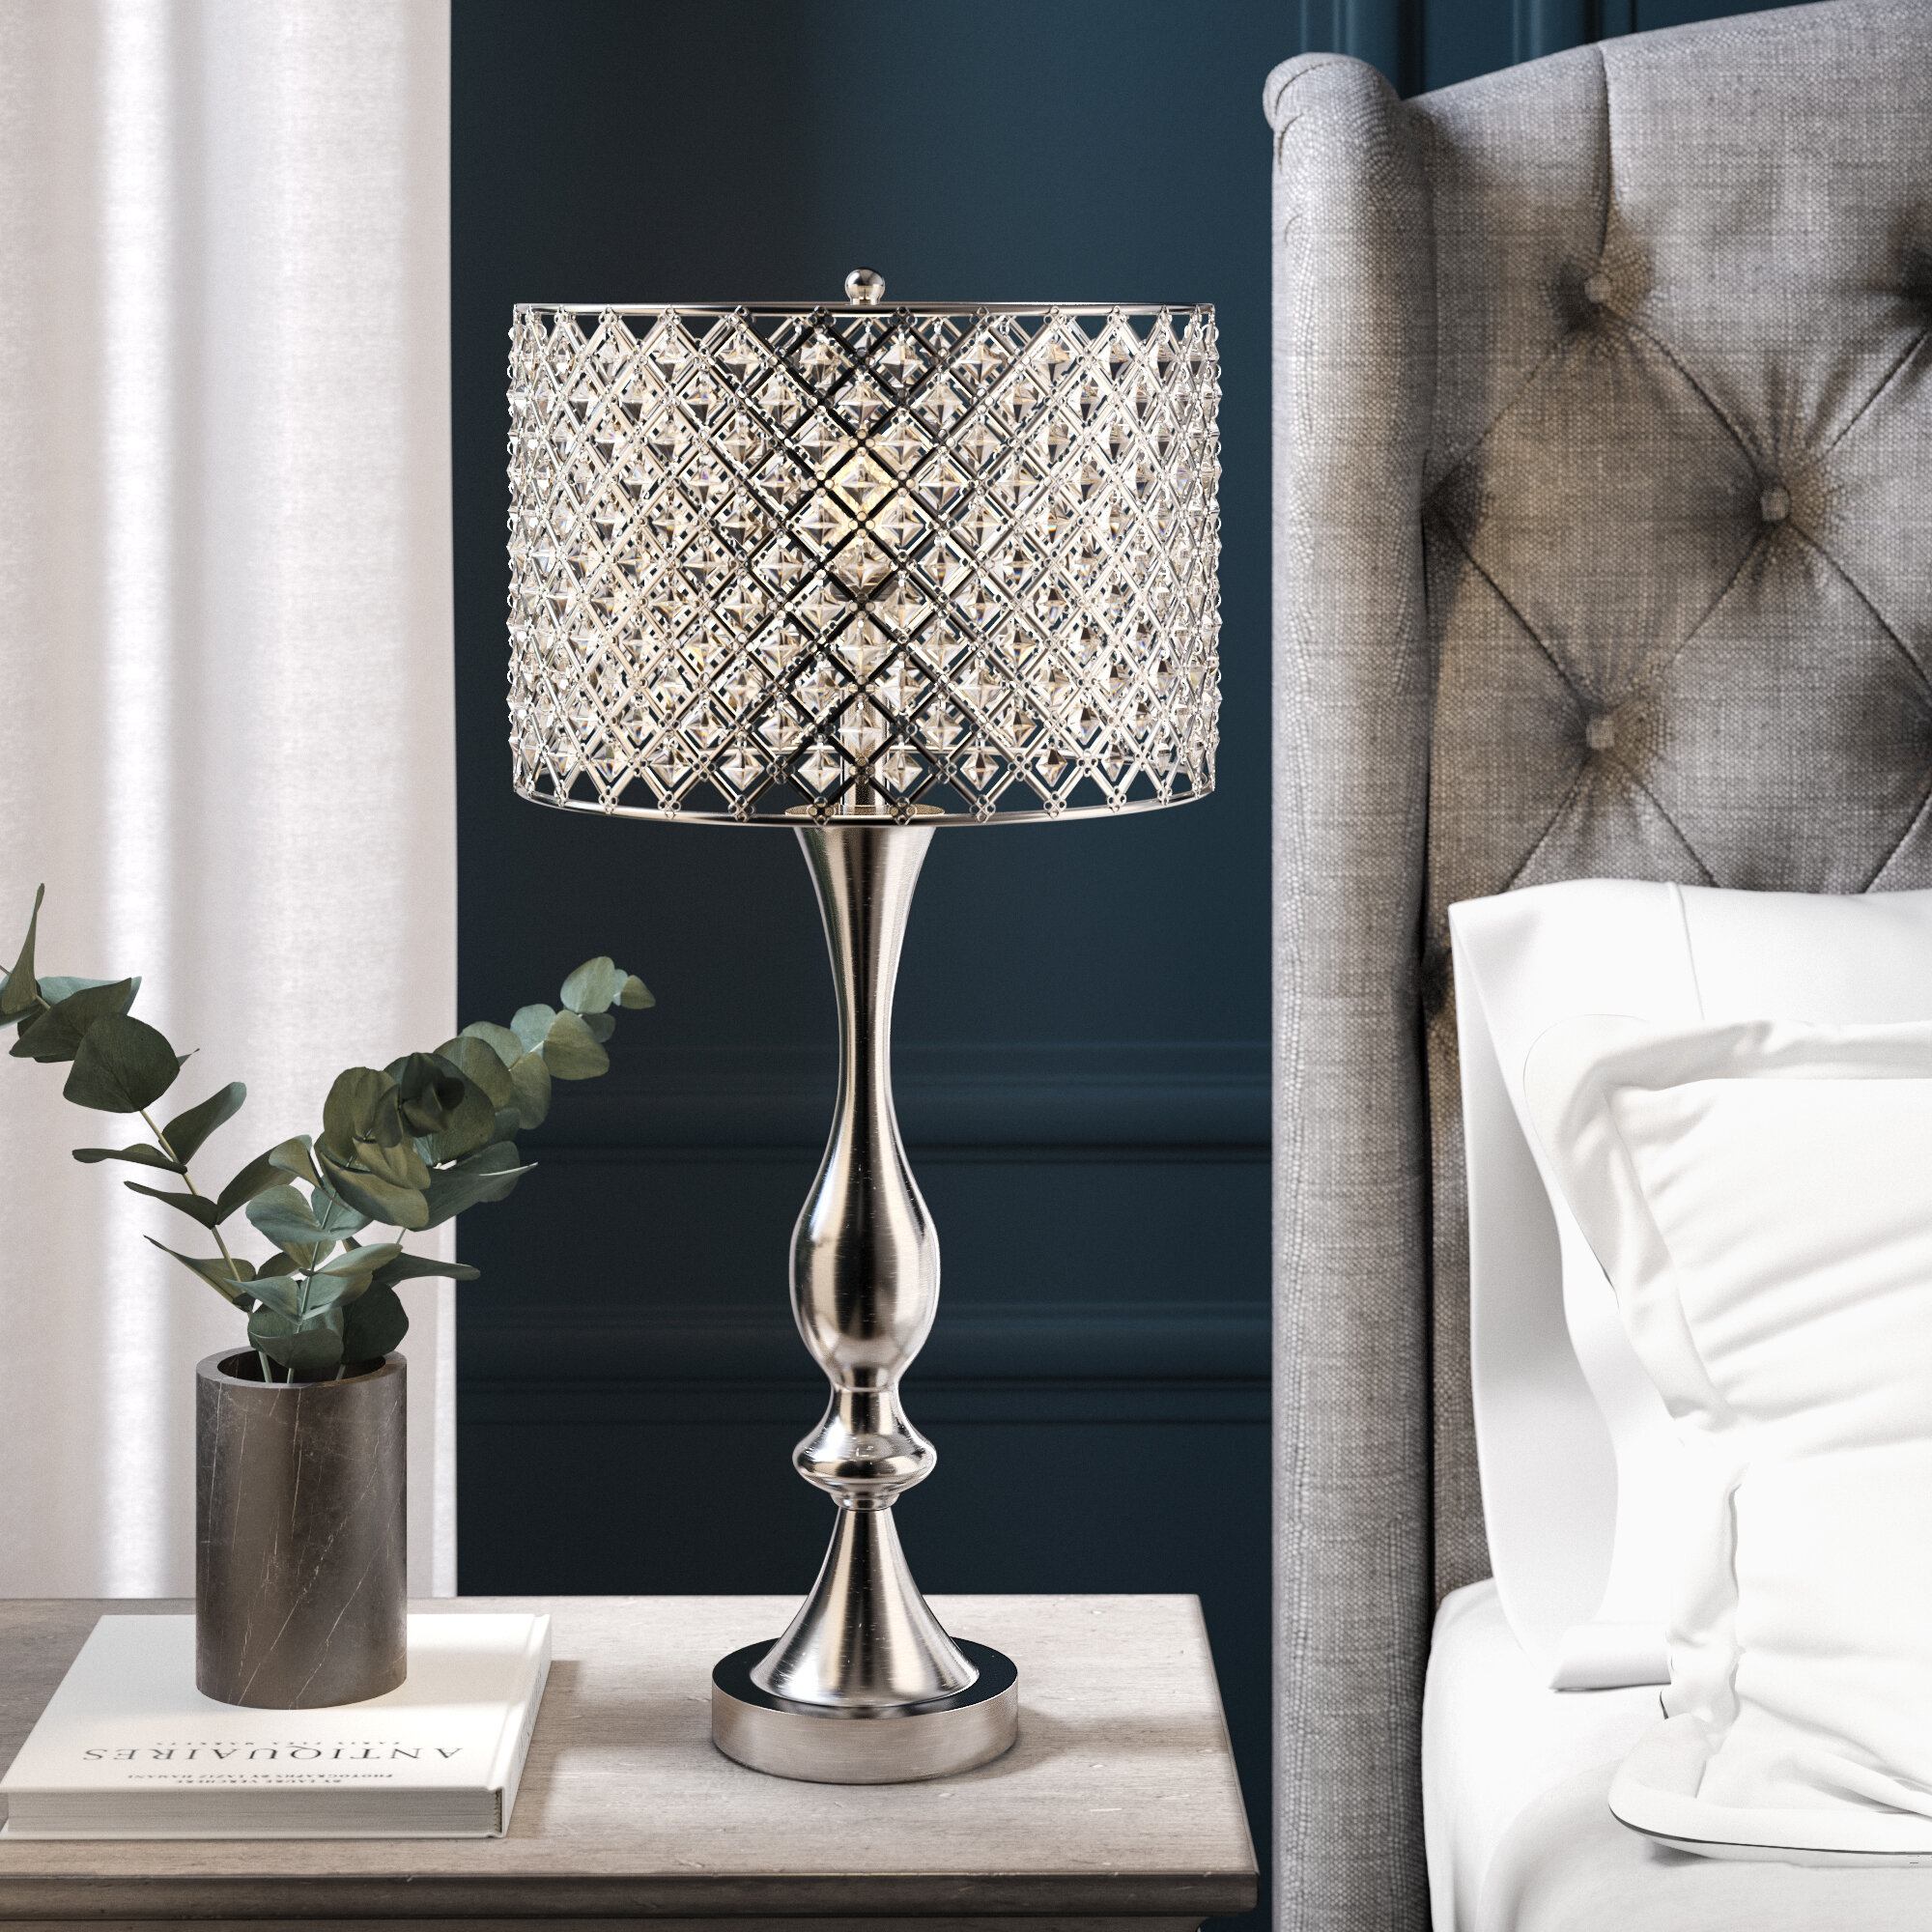 Stupendous Collections Of End Table Lamps For Living Room Photos